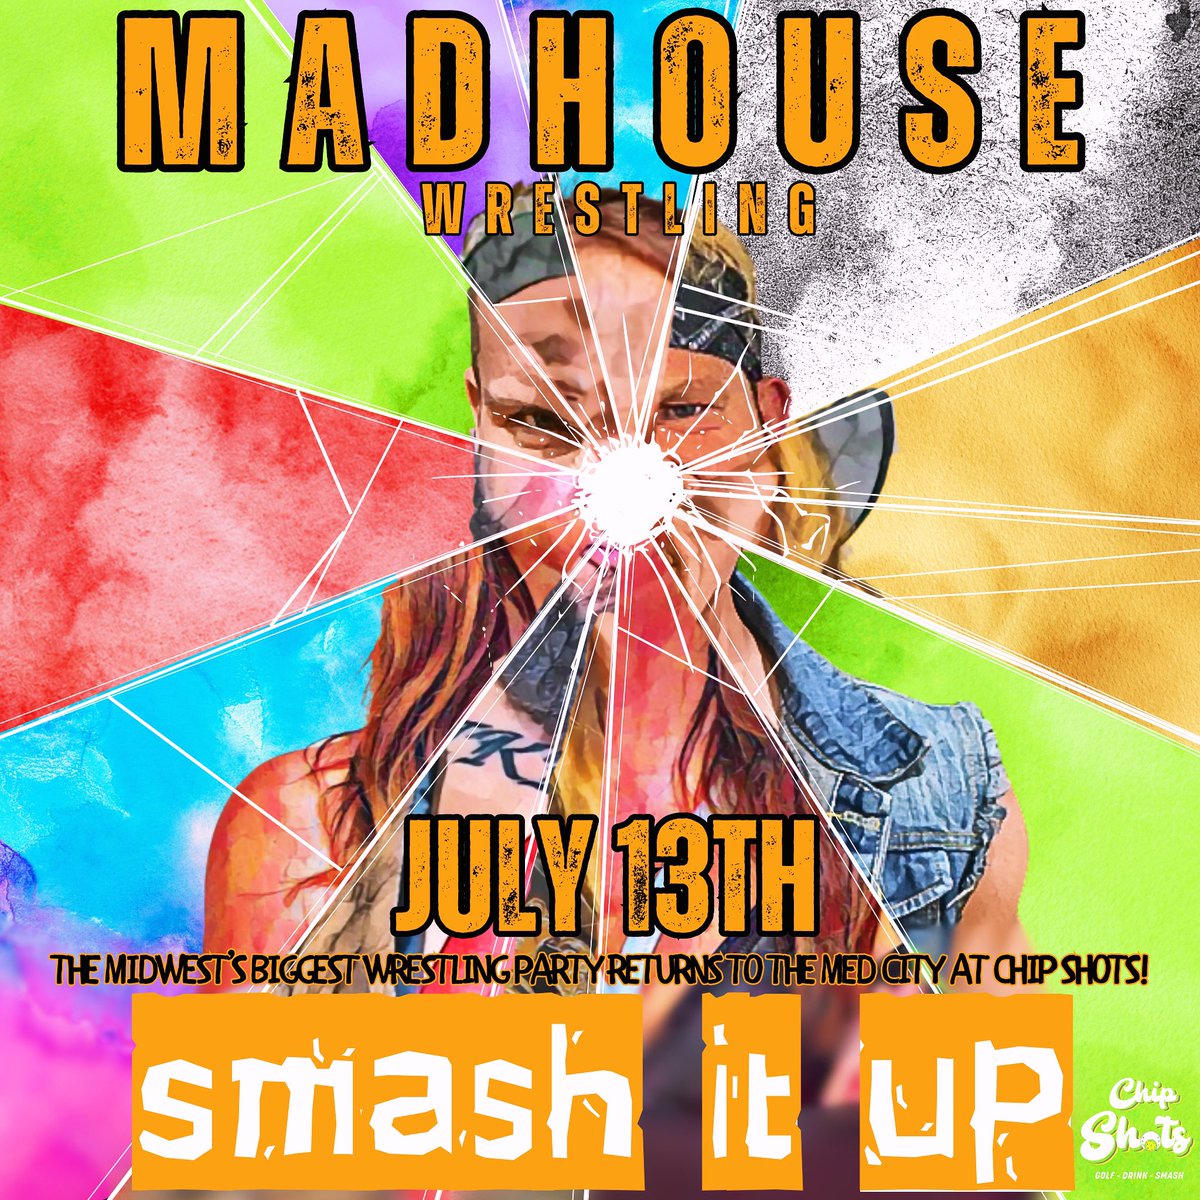 MADHOUSE WRESTLING BRINGS THE BEST WRESTLING PARTY IN THE MIDWEST BACK TO ROCHESTER, MINNESOTA, ON JULY 13TH WITH SMASH IT UP AT CHIP SHOTS! TICKETS ON SALE SOON!